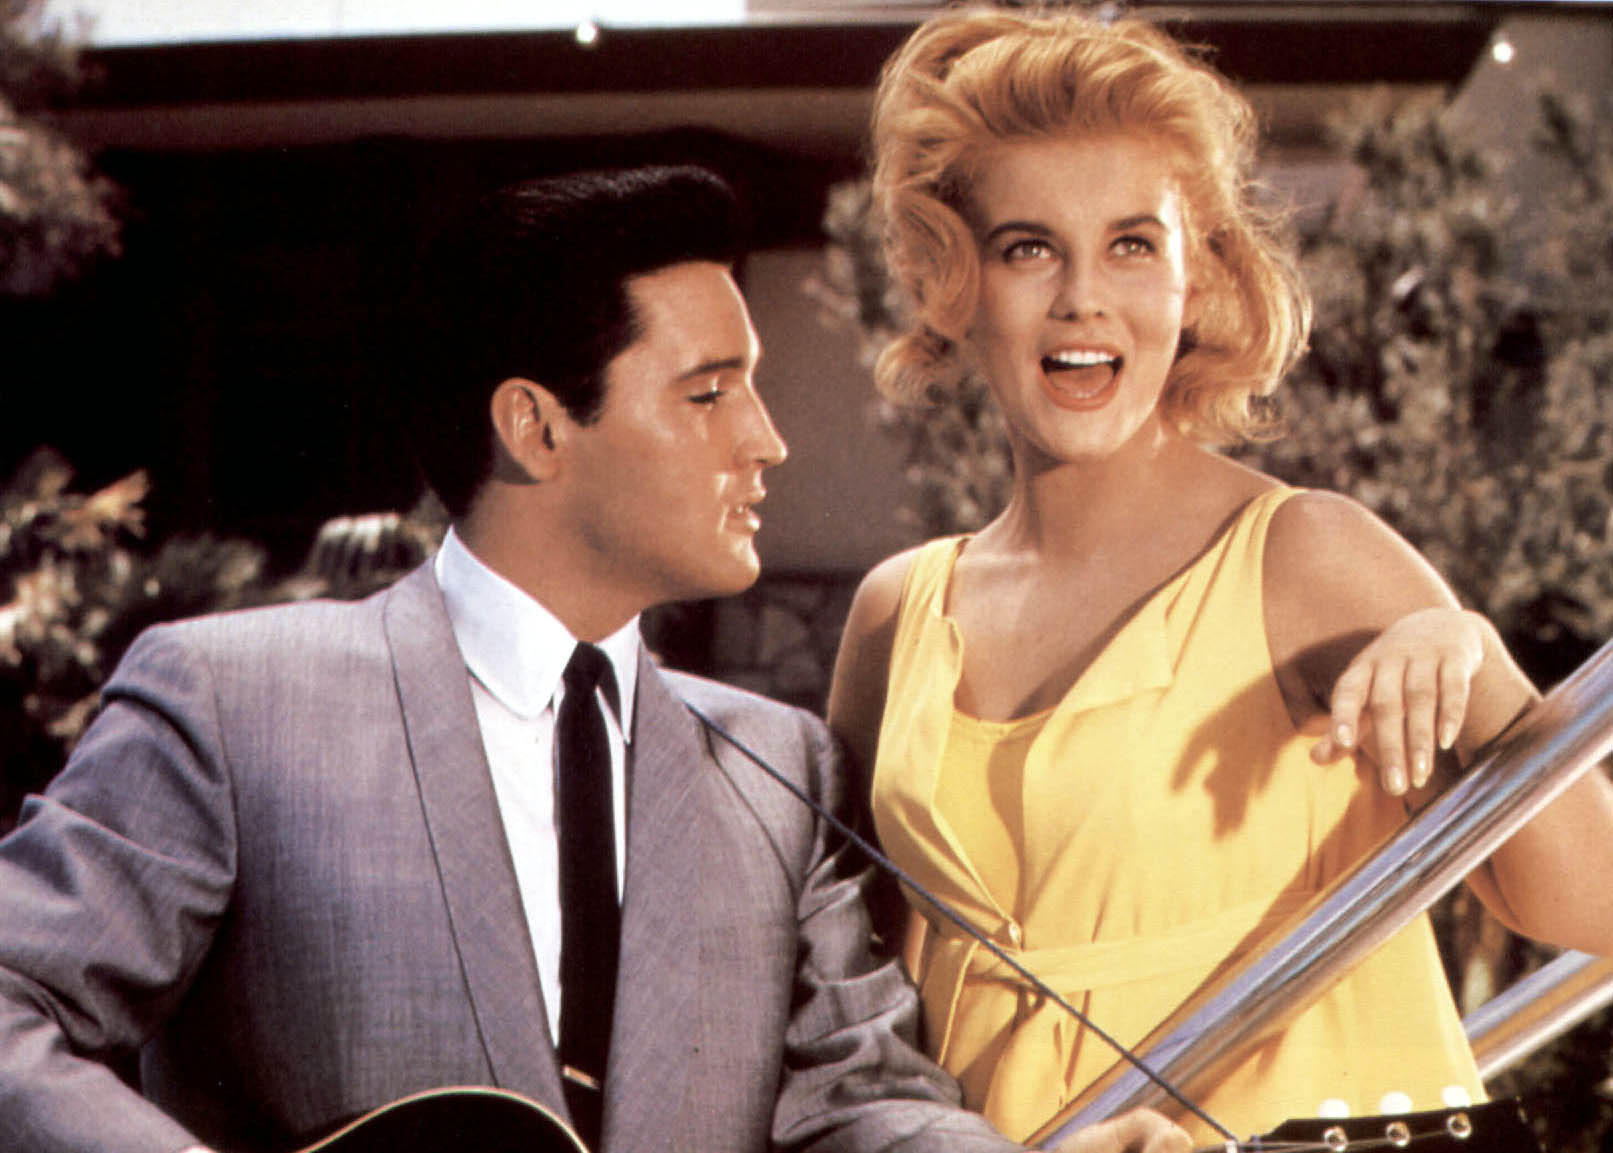 Elvis Presley and Ann-Margret on the set of "Viva Las Vegas" in 1964 | Source: Getty Images